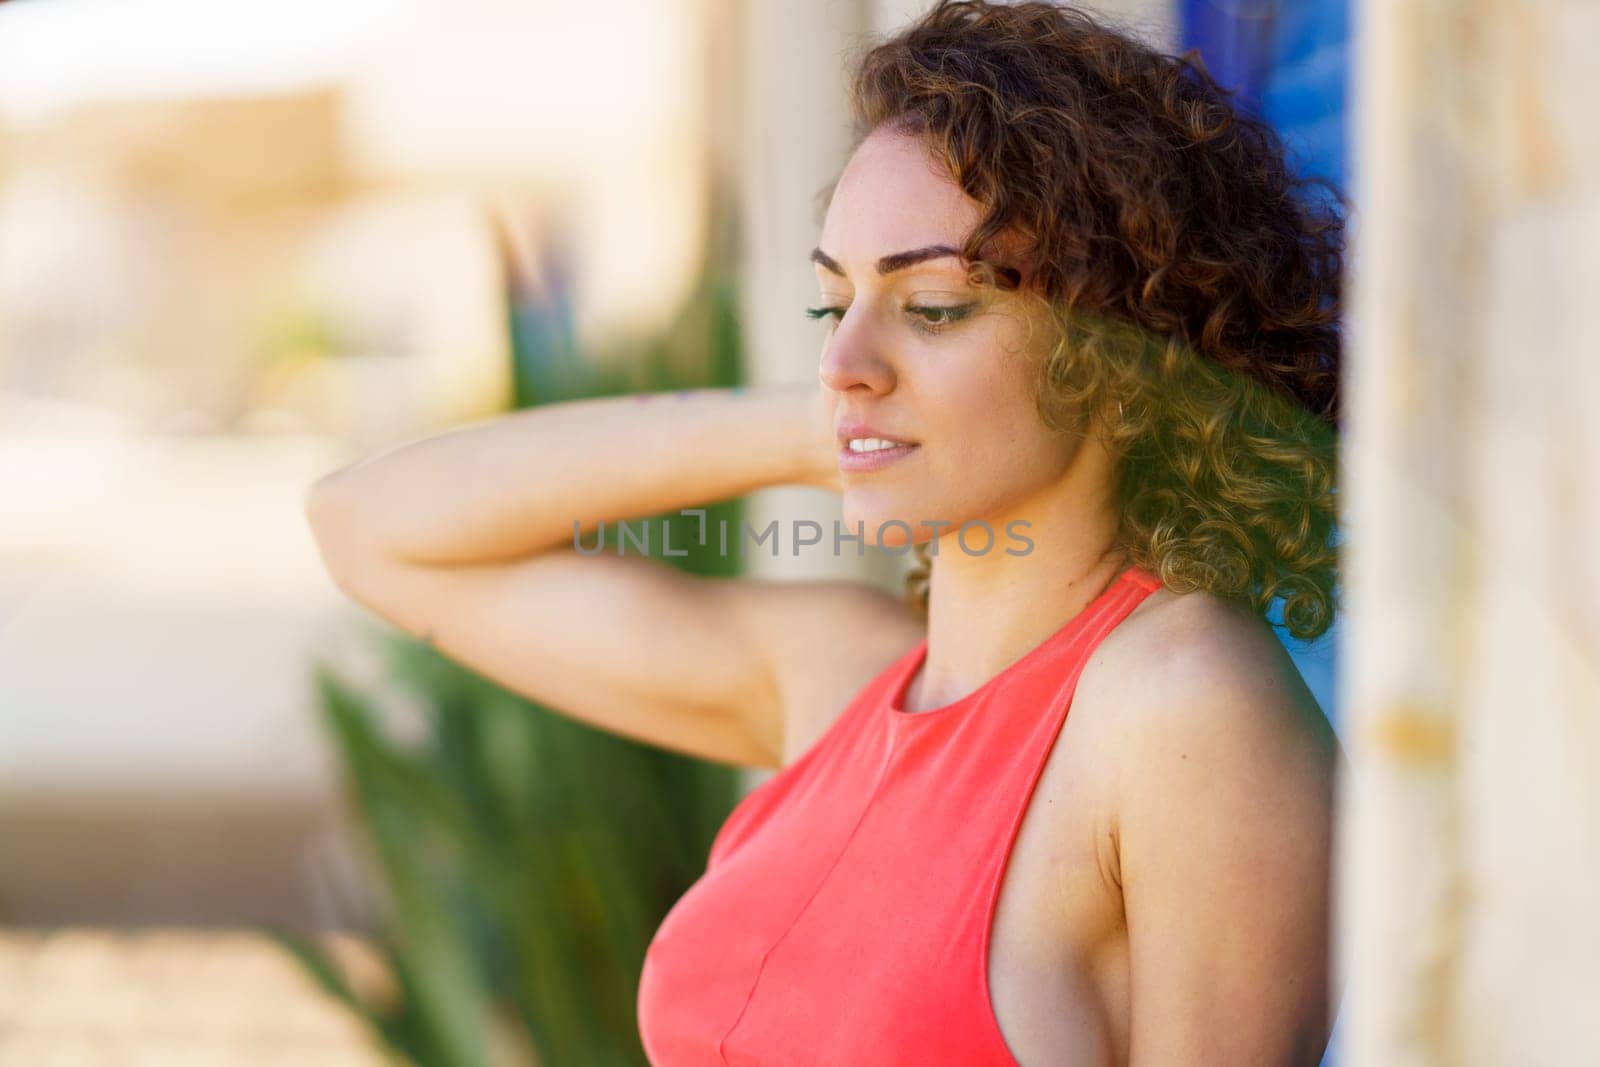 Side view of pensive young woman in sundress, with hand touching back of head standing in street near wall with blue shutters and looking down against blurred urban background